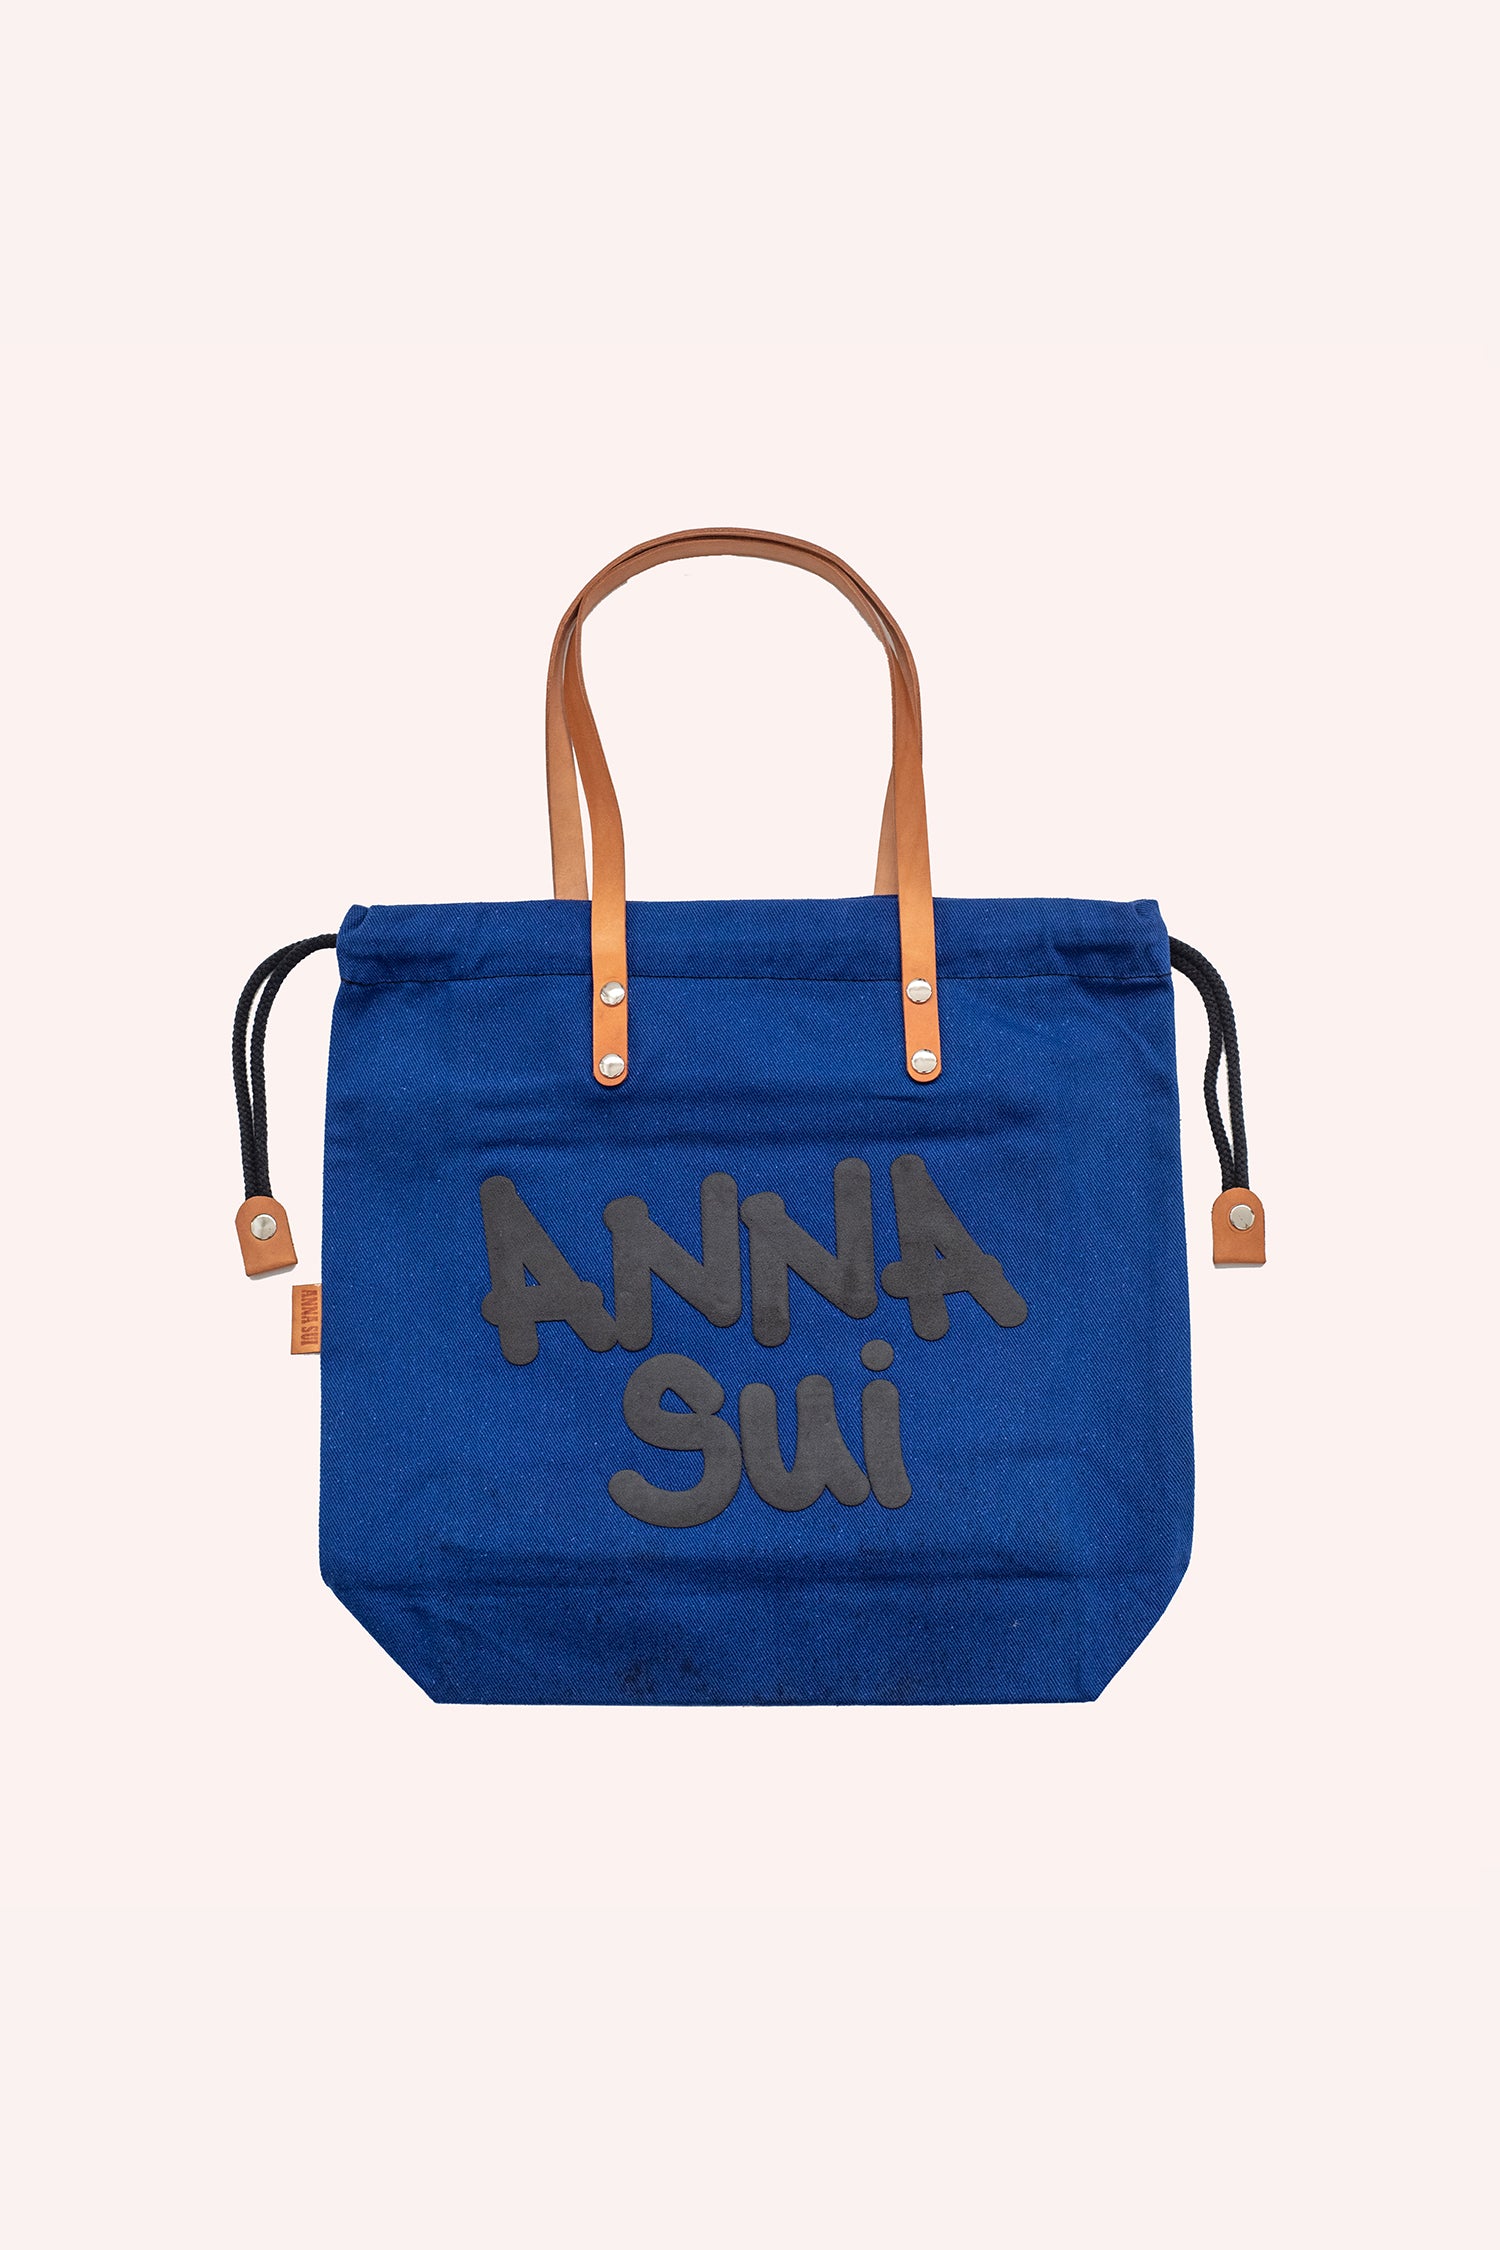 Tote bag, navy squared shape, brown handles, black laces to closed, Anna Sui label in large font